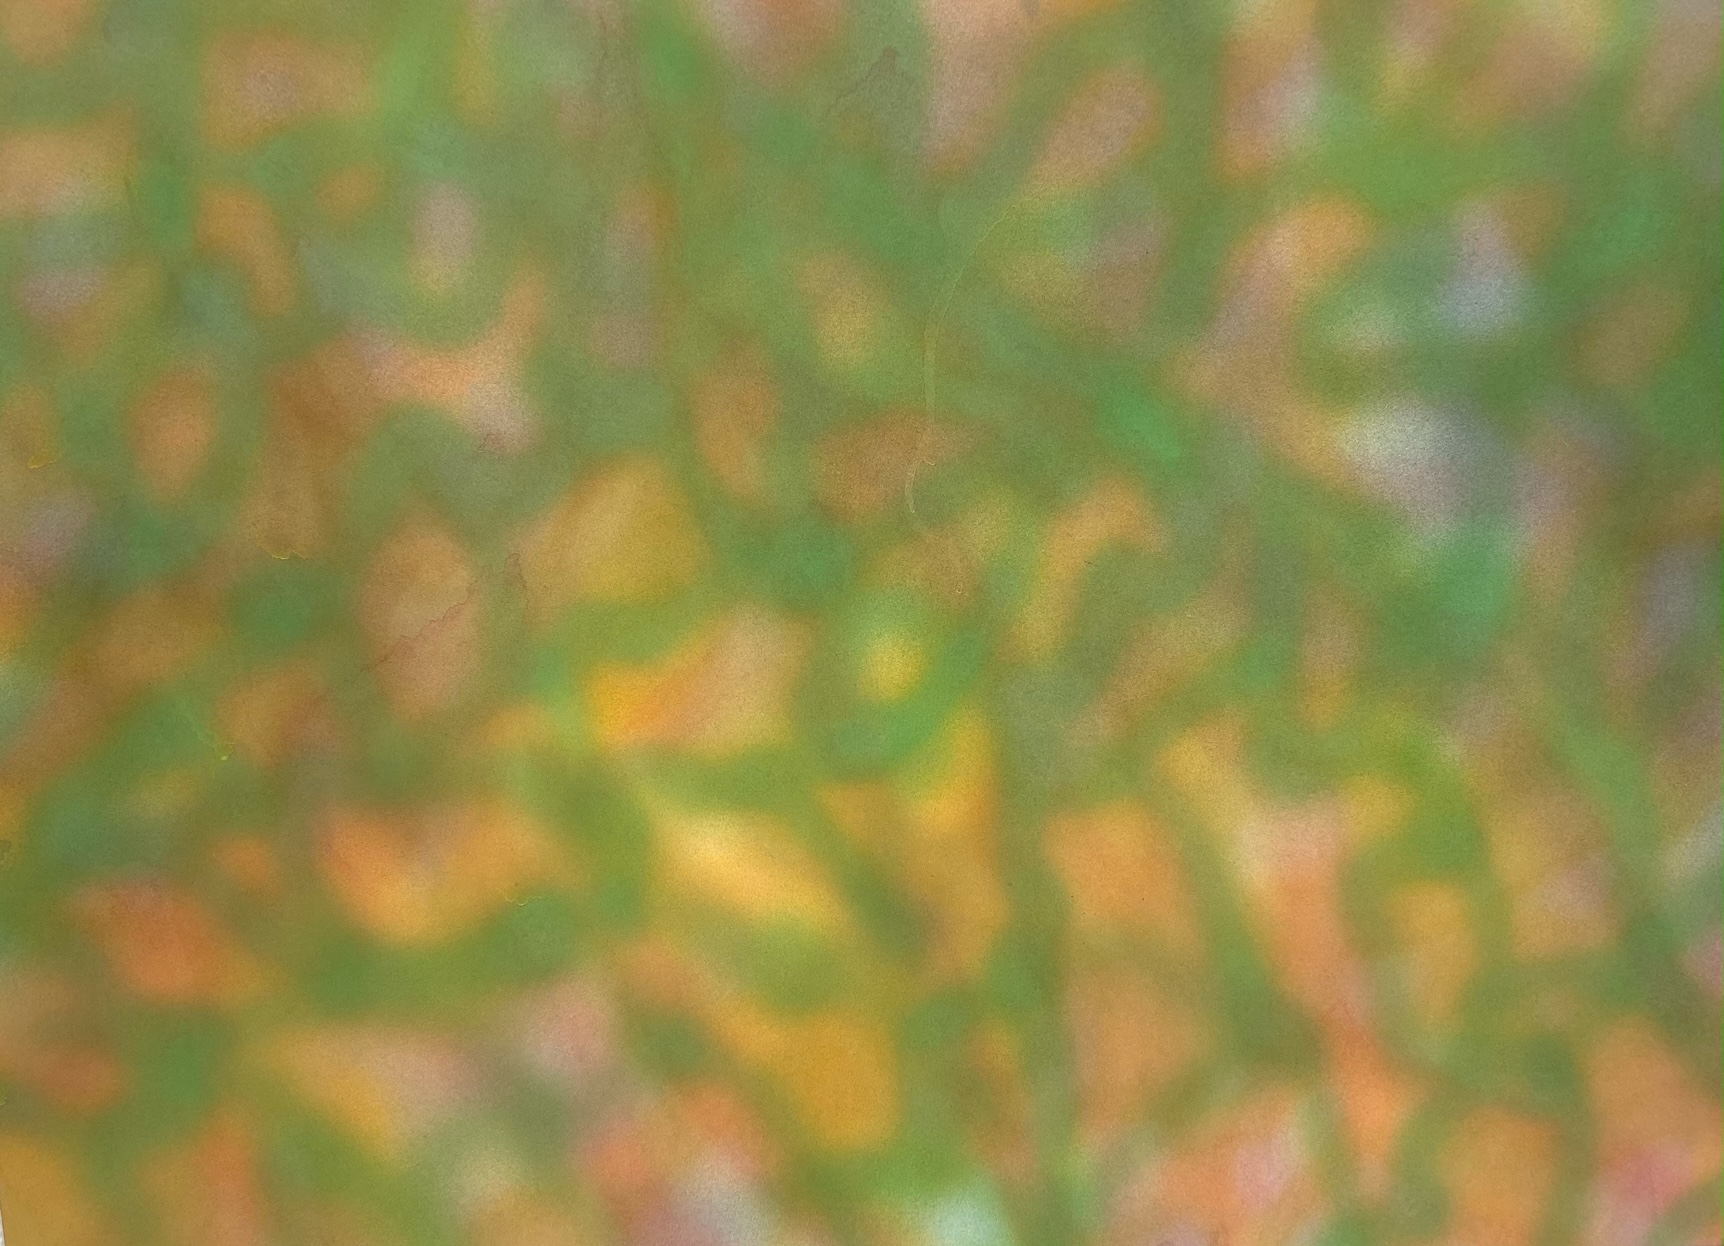 Ann Resnick, “Untitled (Green/Orange)”, Watercolor on paper